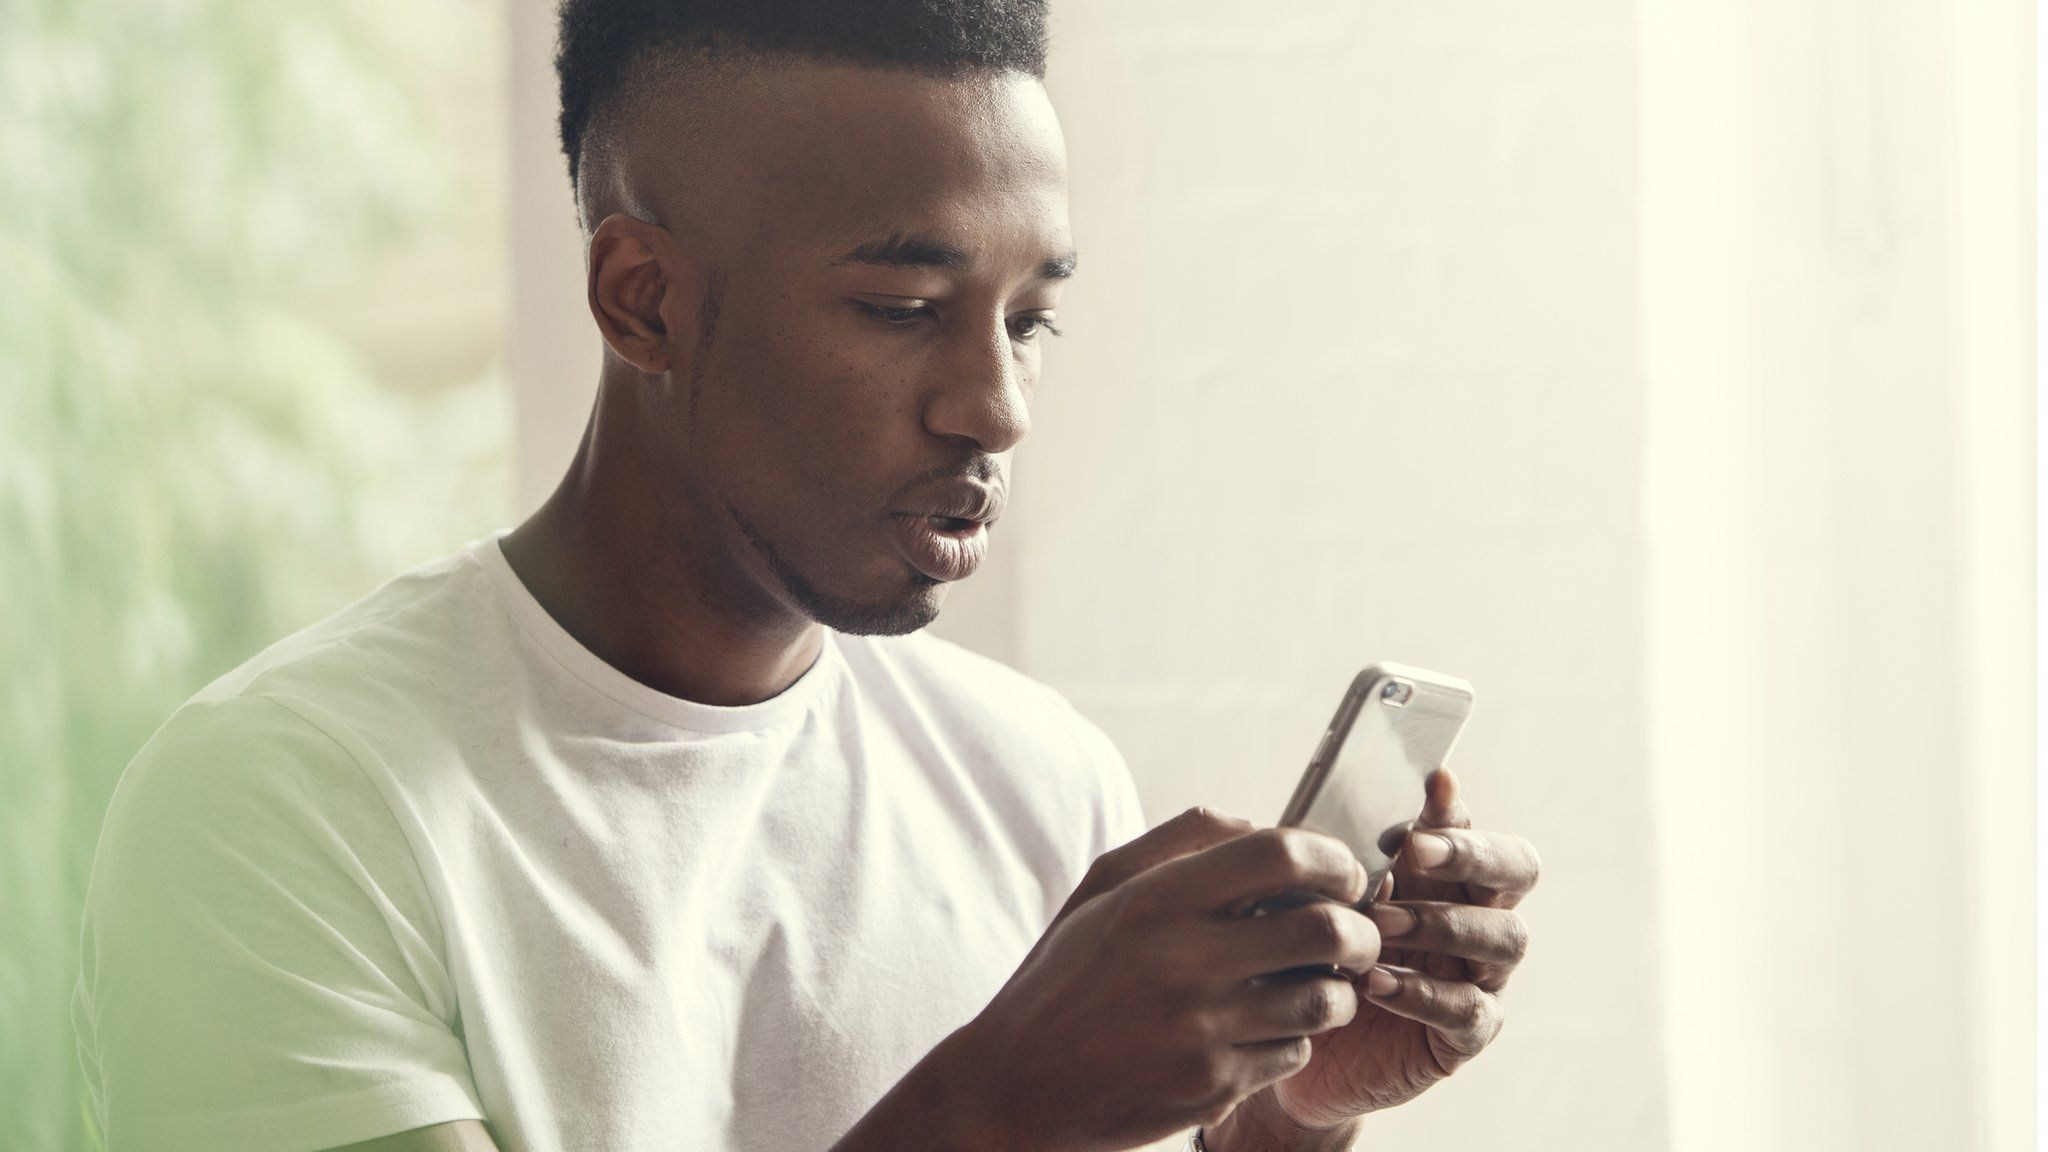 Young man texting on a phone